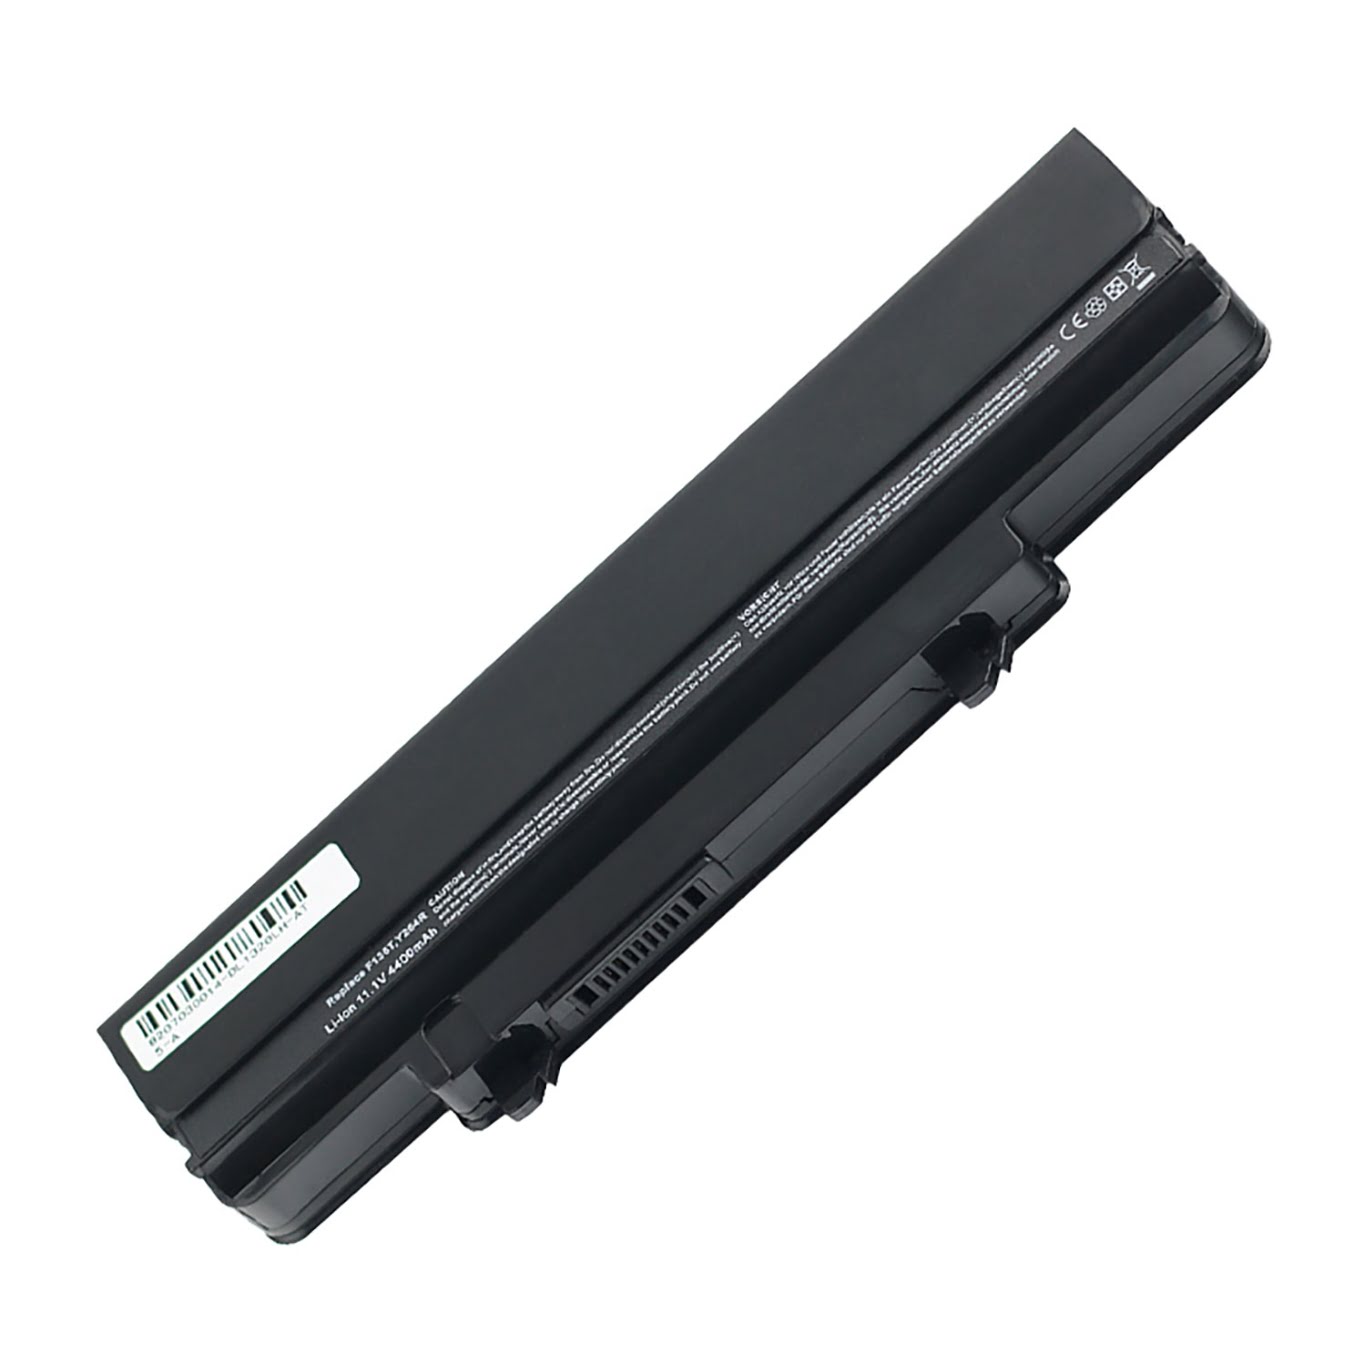 Dell 0c042t, 0d034t Laptop Battery For Inspiron 13, Inspiron 1320 replacement